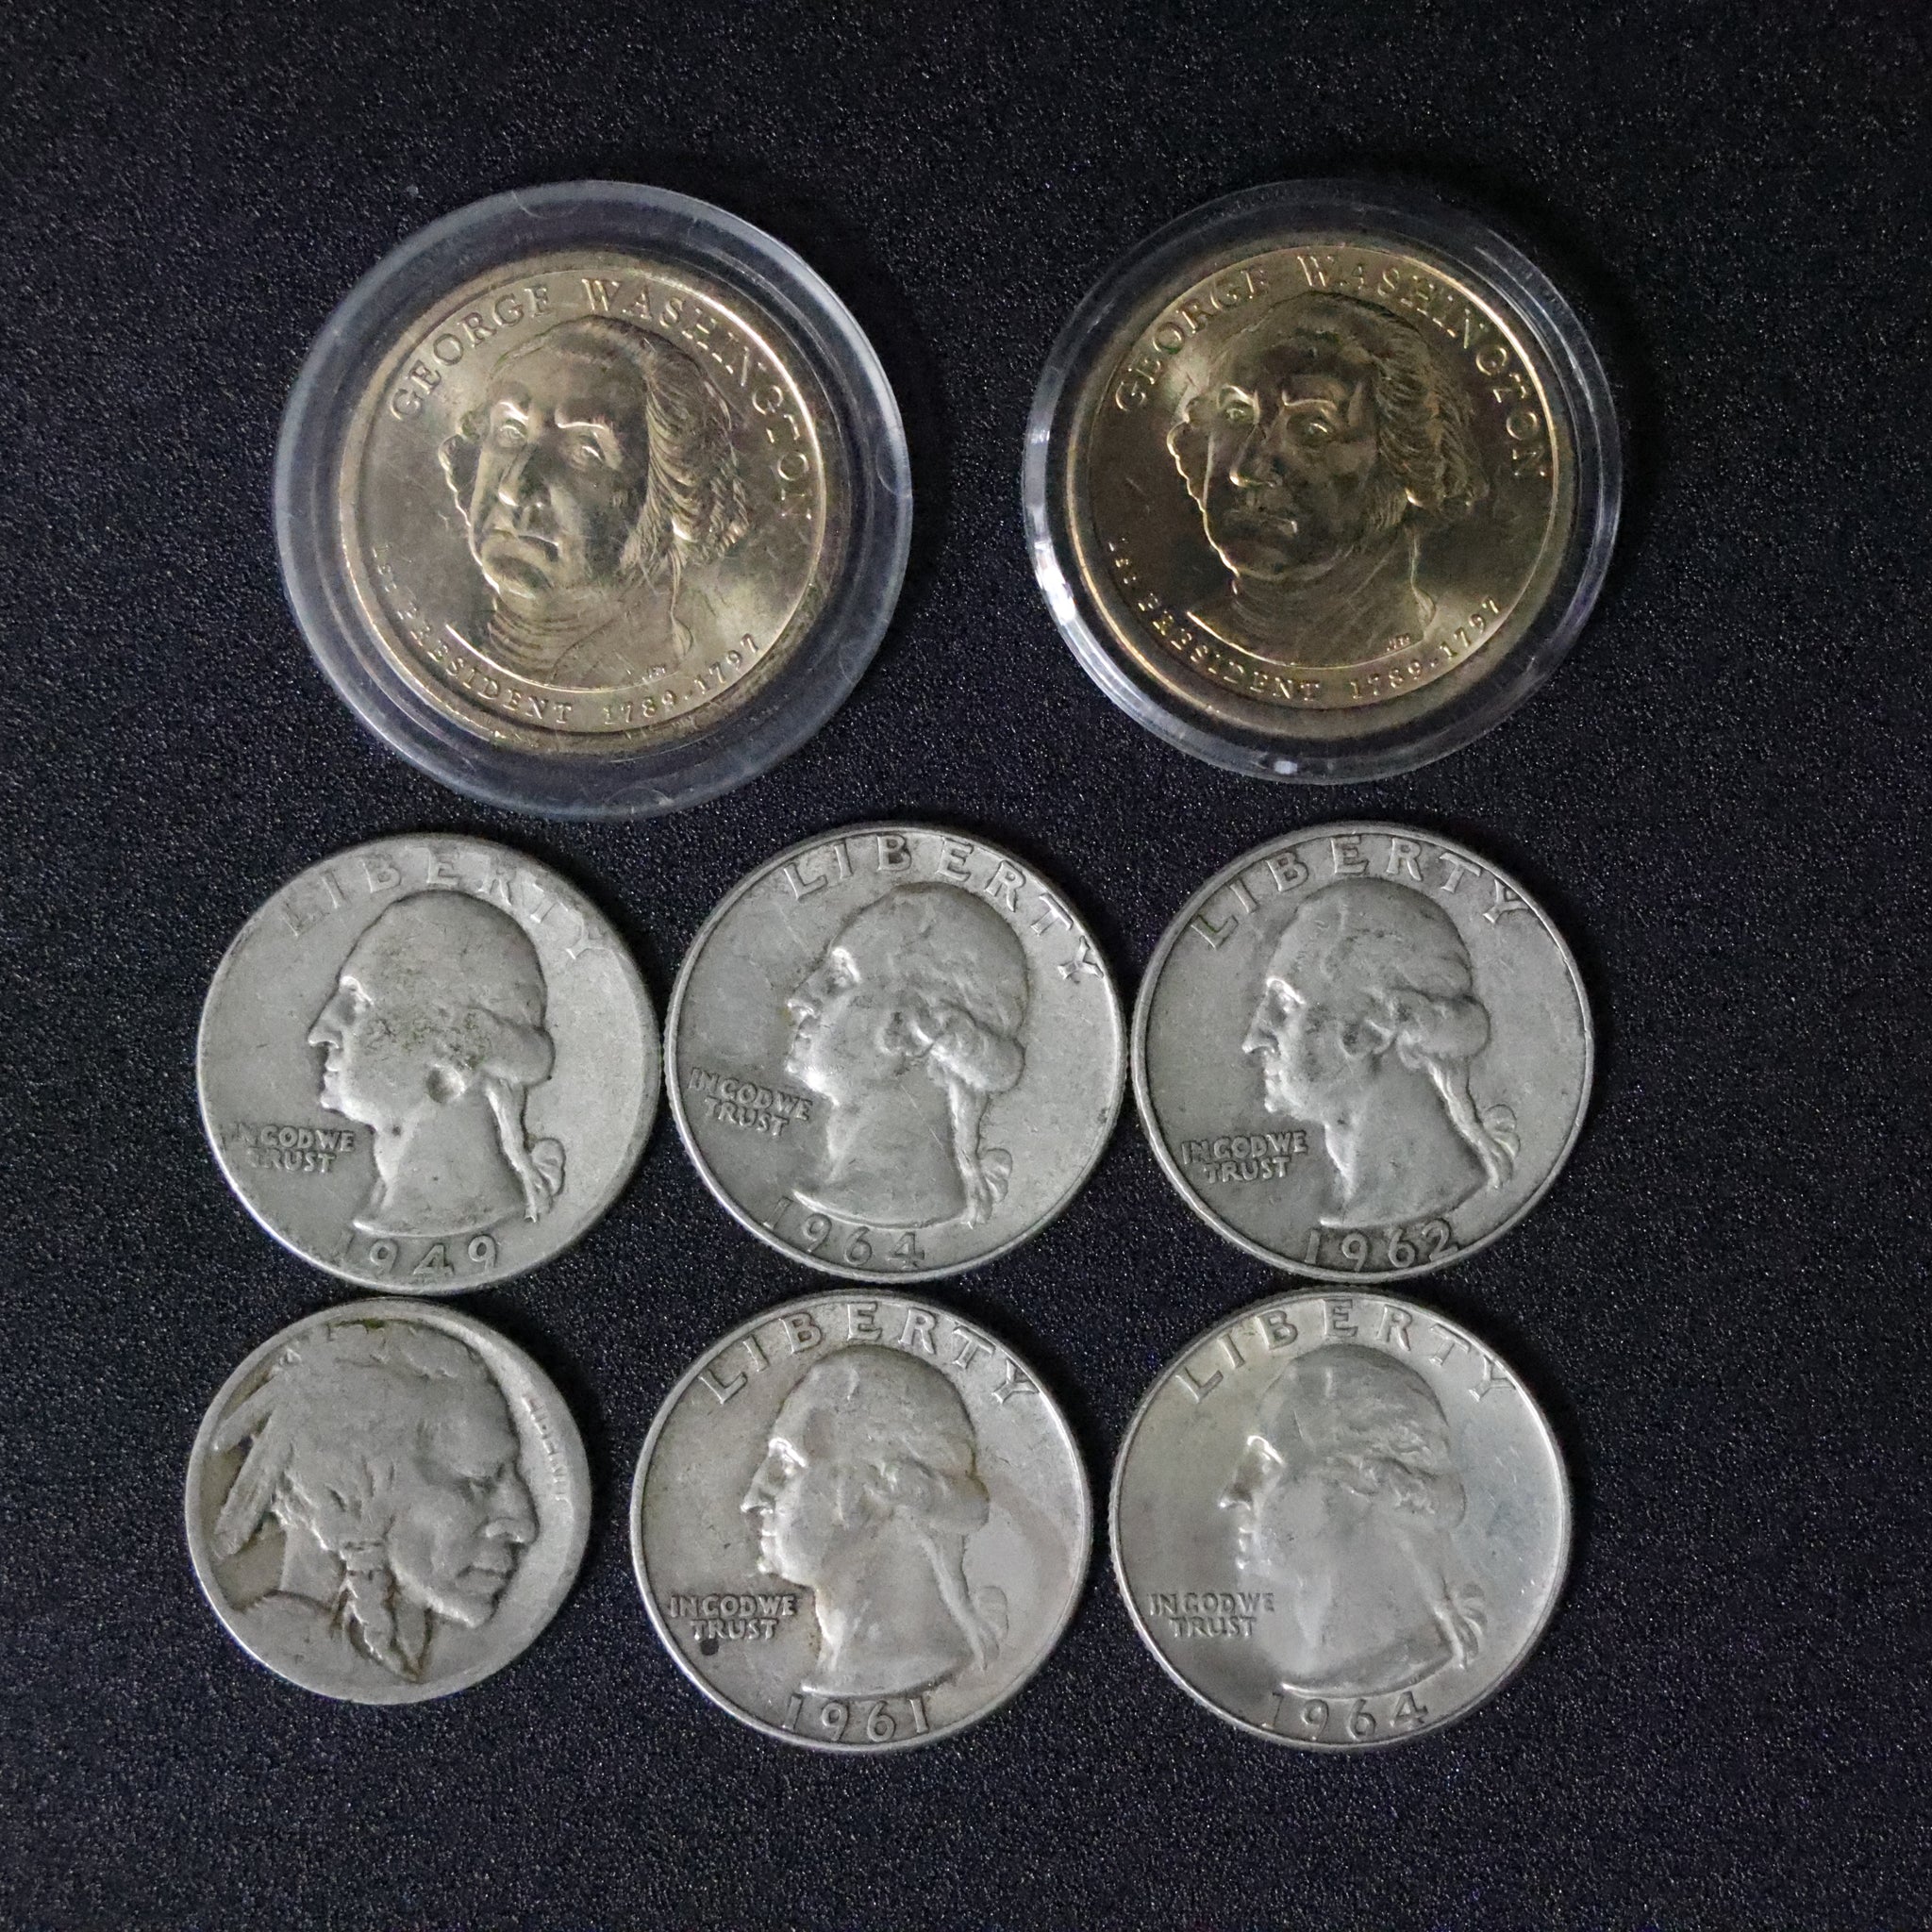 Diverse Mix of U.S. Collectible Coins: Silver Quarters and Modern Commemorative Dollar